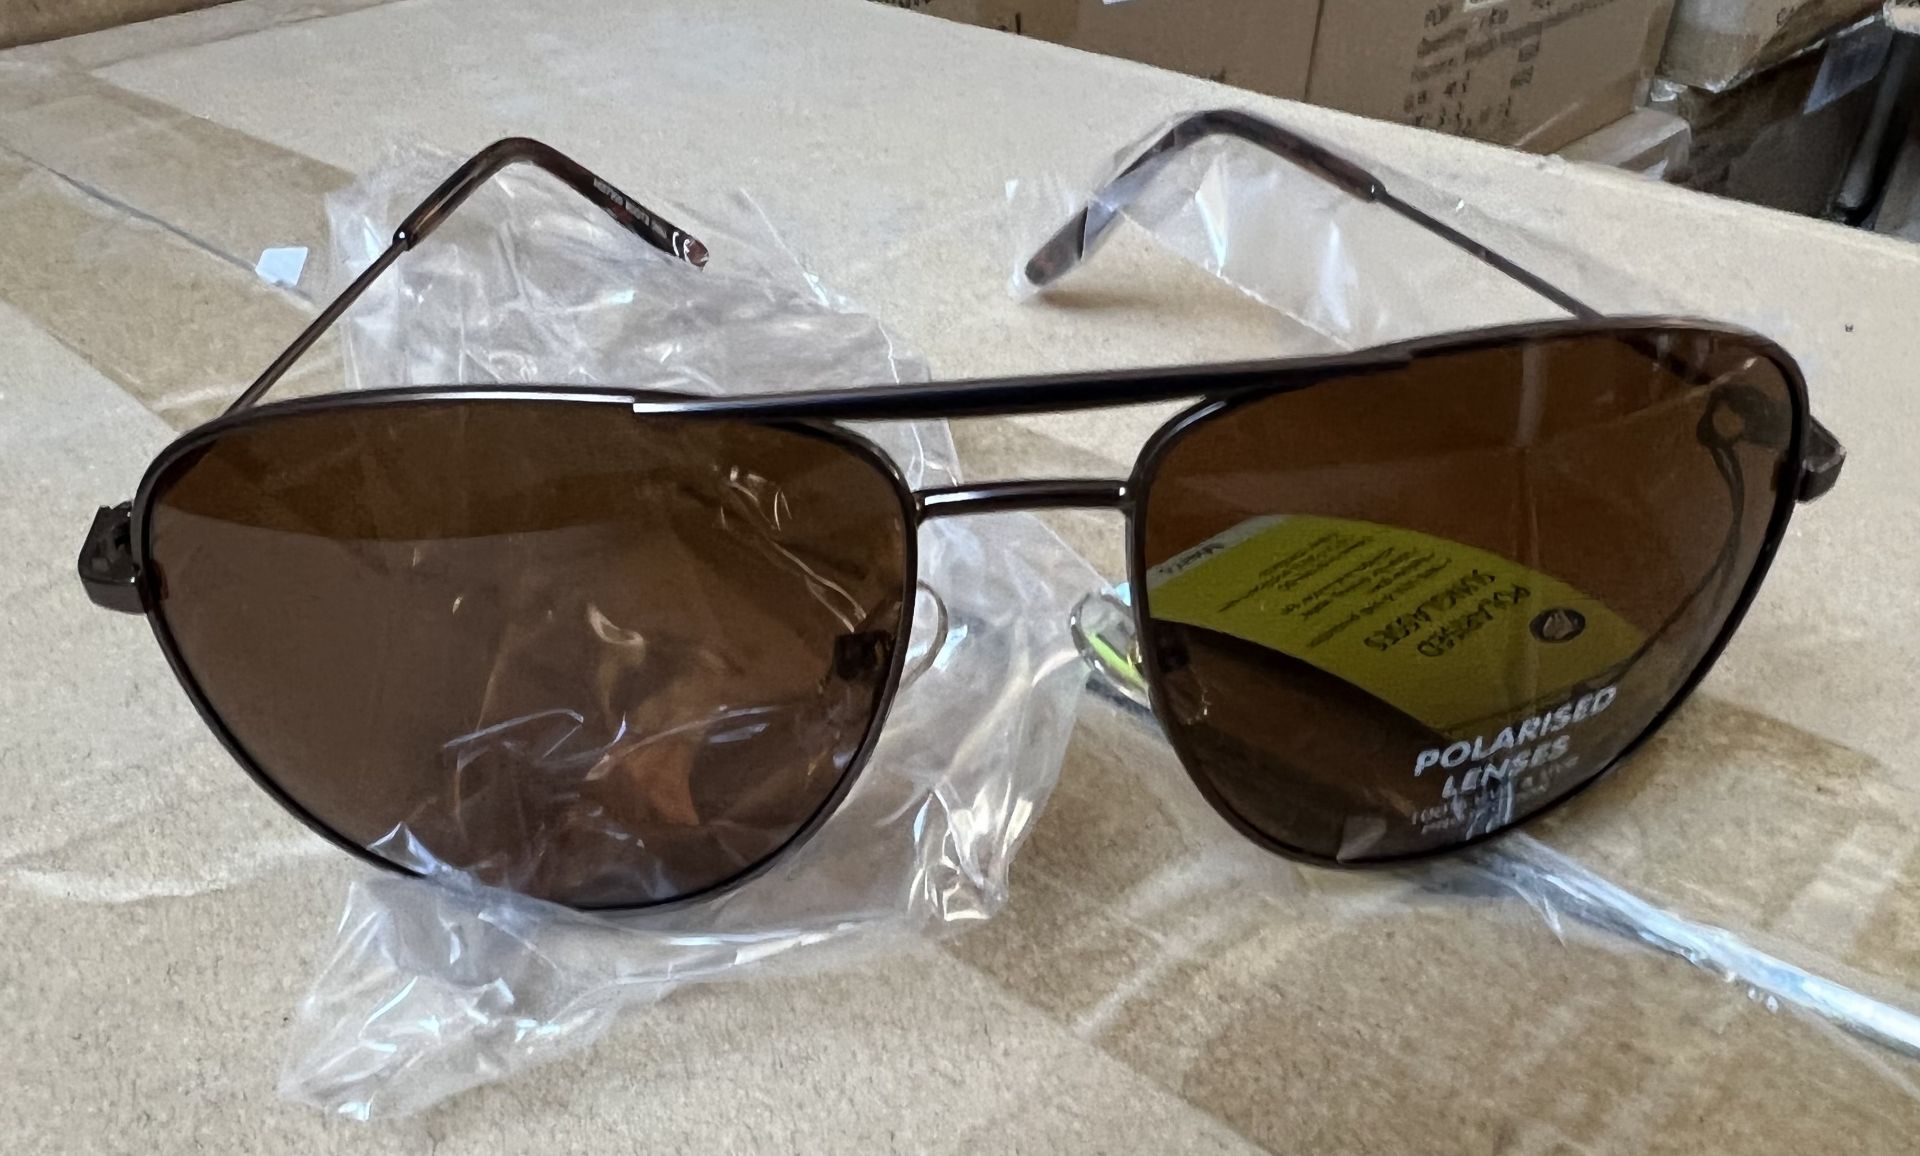 20 x Boots Polarised Lens Pilot Style Sunglasses 100% UVA - (NEW) - BOOTS RRP Â£660 ! - Image 6 of 7